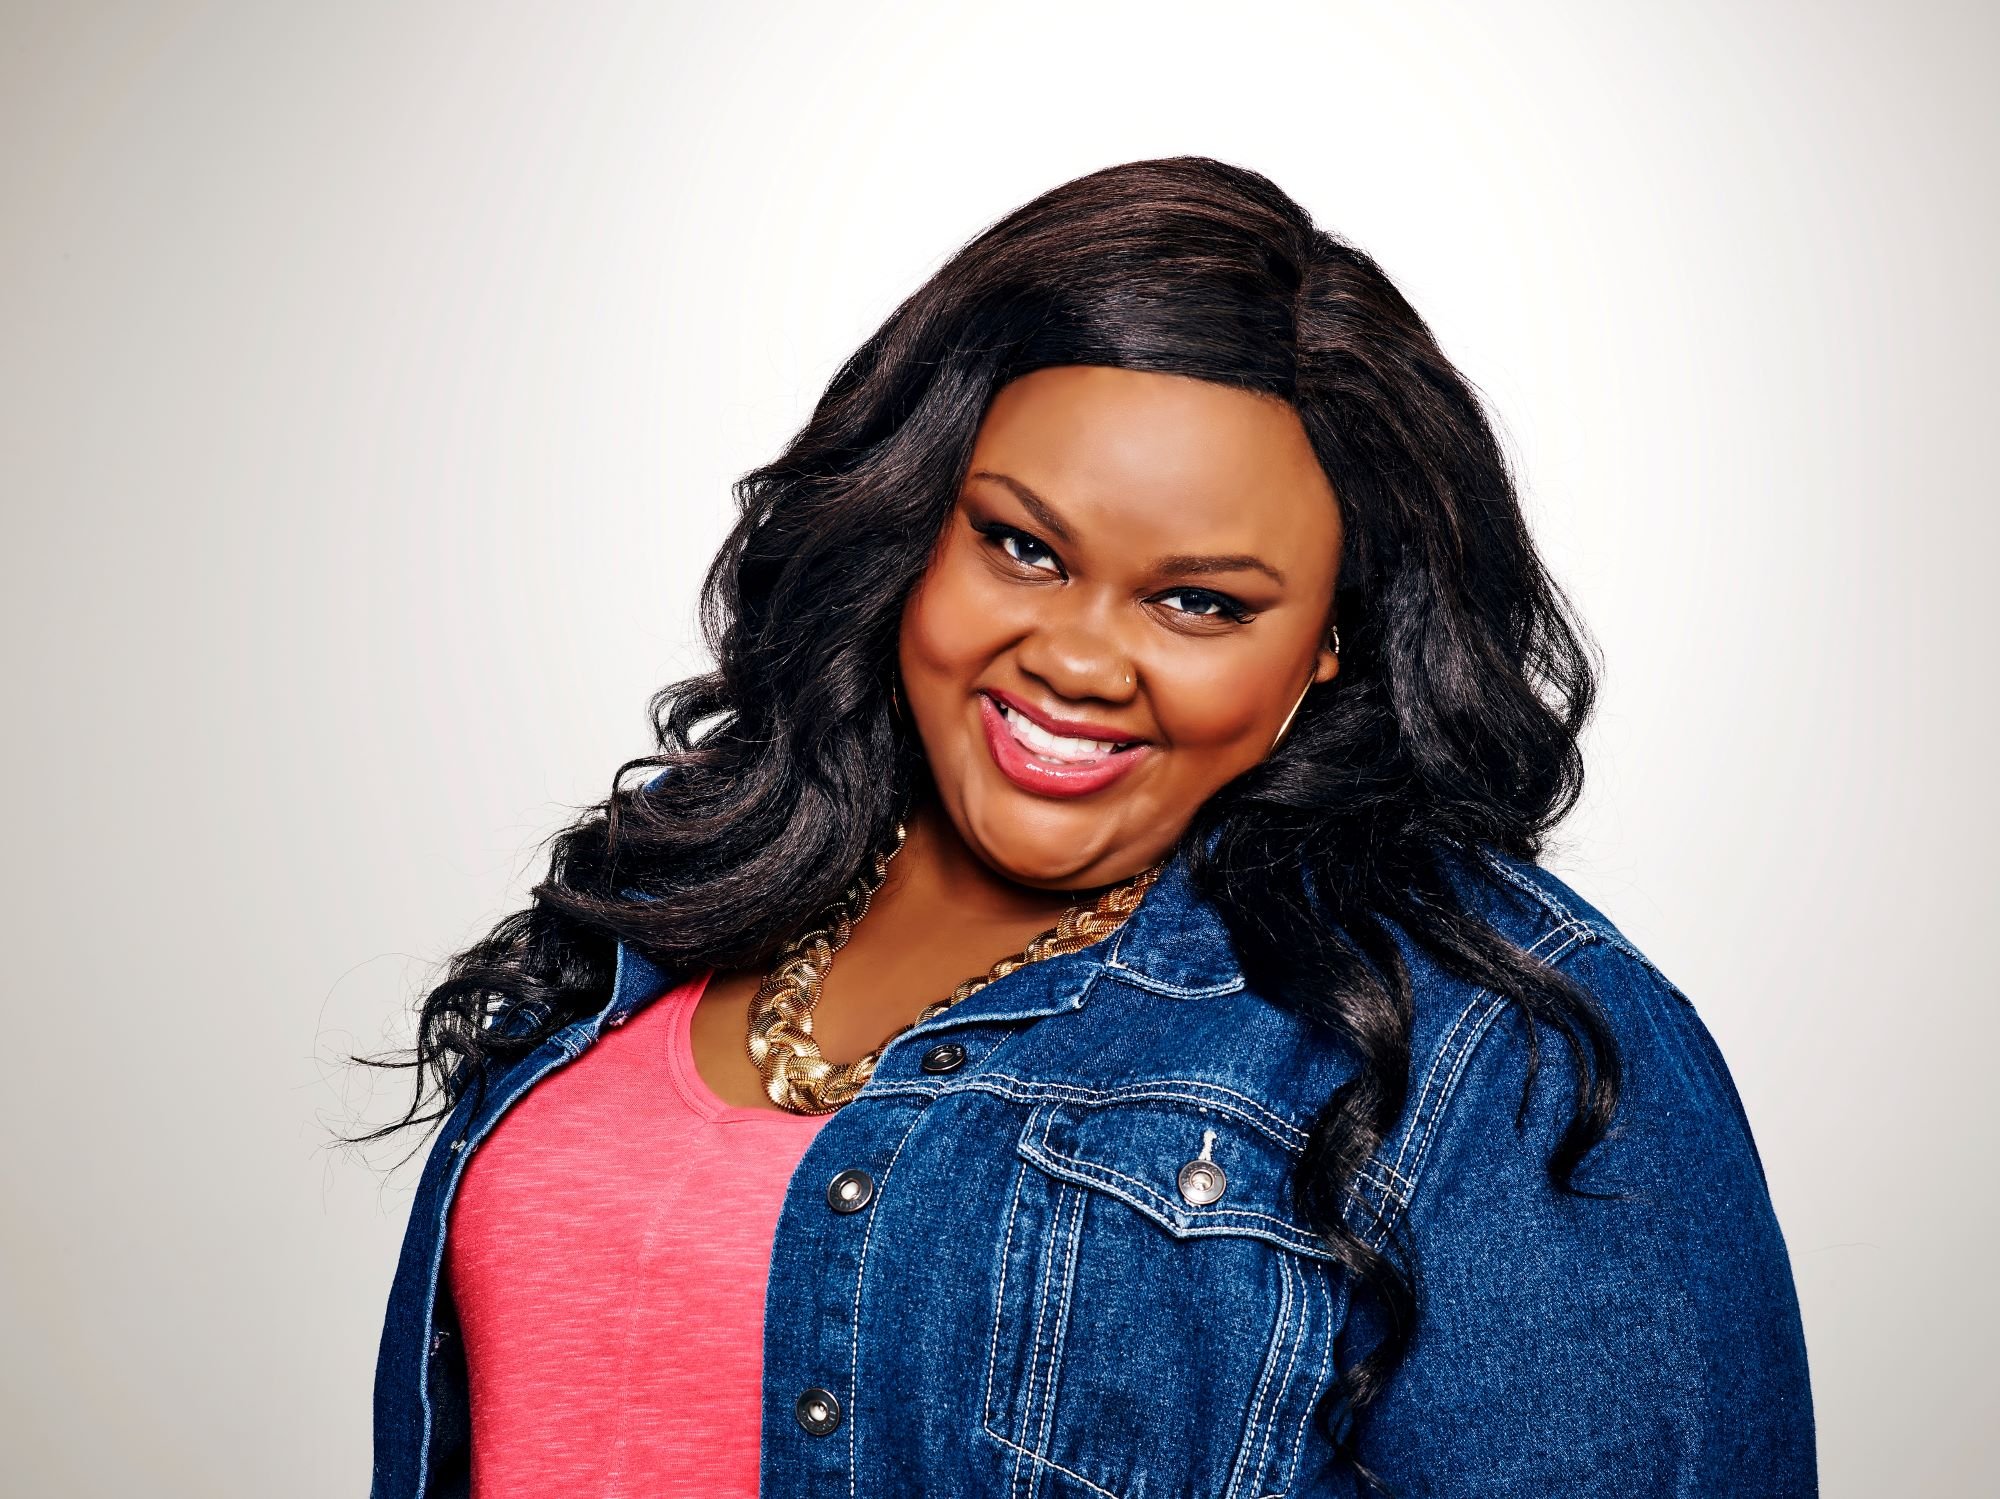 Nicole Byer dressed in a blue jean jacket in front of a white background.